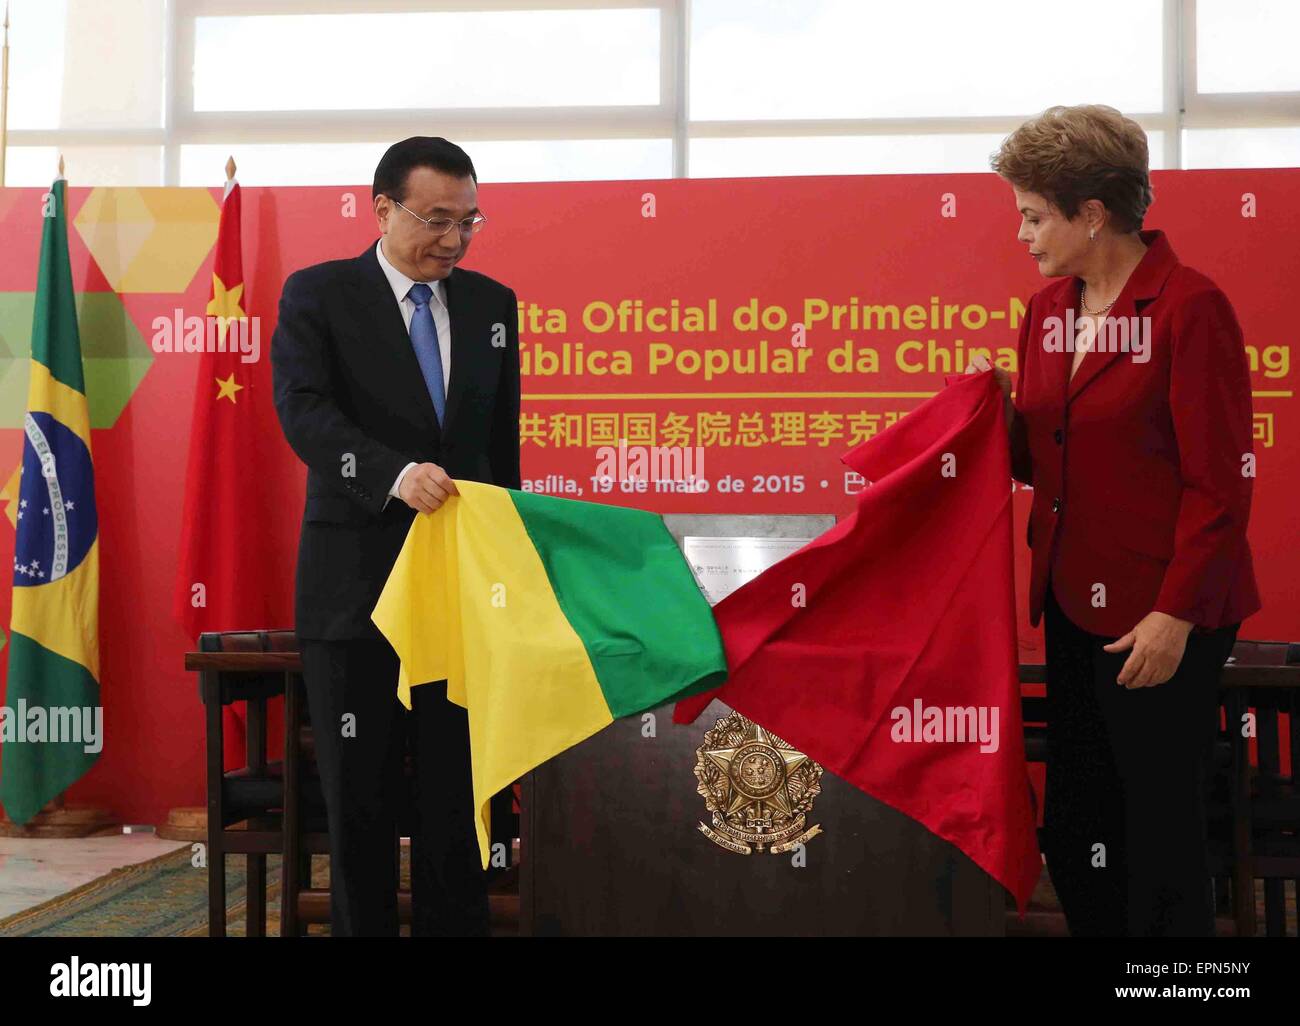 Brasilia, Brazil. 19th May, 2015. Chinese Premier Li Keqiang (L) and Brazilian President Dilma Rousseff attend a video ground-breaking ceremony for the ultra-high voltage electricity transmission project at the Belo Monte hydroelectric dam, in Brasilia, capital of Brazil, May 19, 2015. In February 2014, China's State Grid won the bid to build power lines to the huge Belo Monte dam on the Xingu River in the state of Para, north Brazil. © Liu Weibing/Xinhua/Alamy Live News Stock Photo